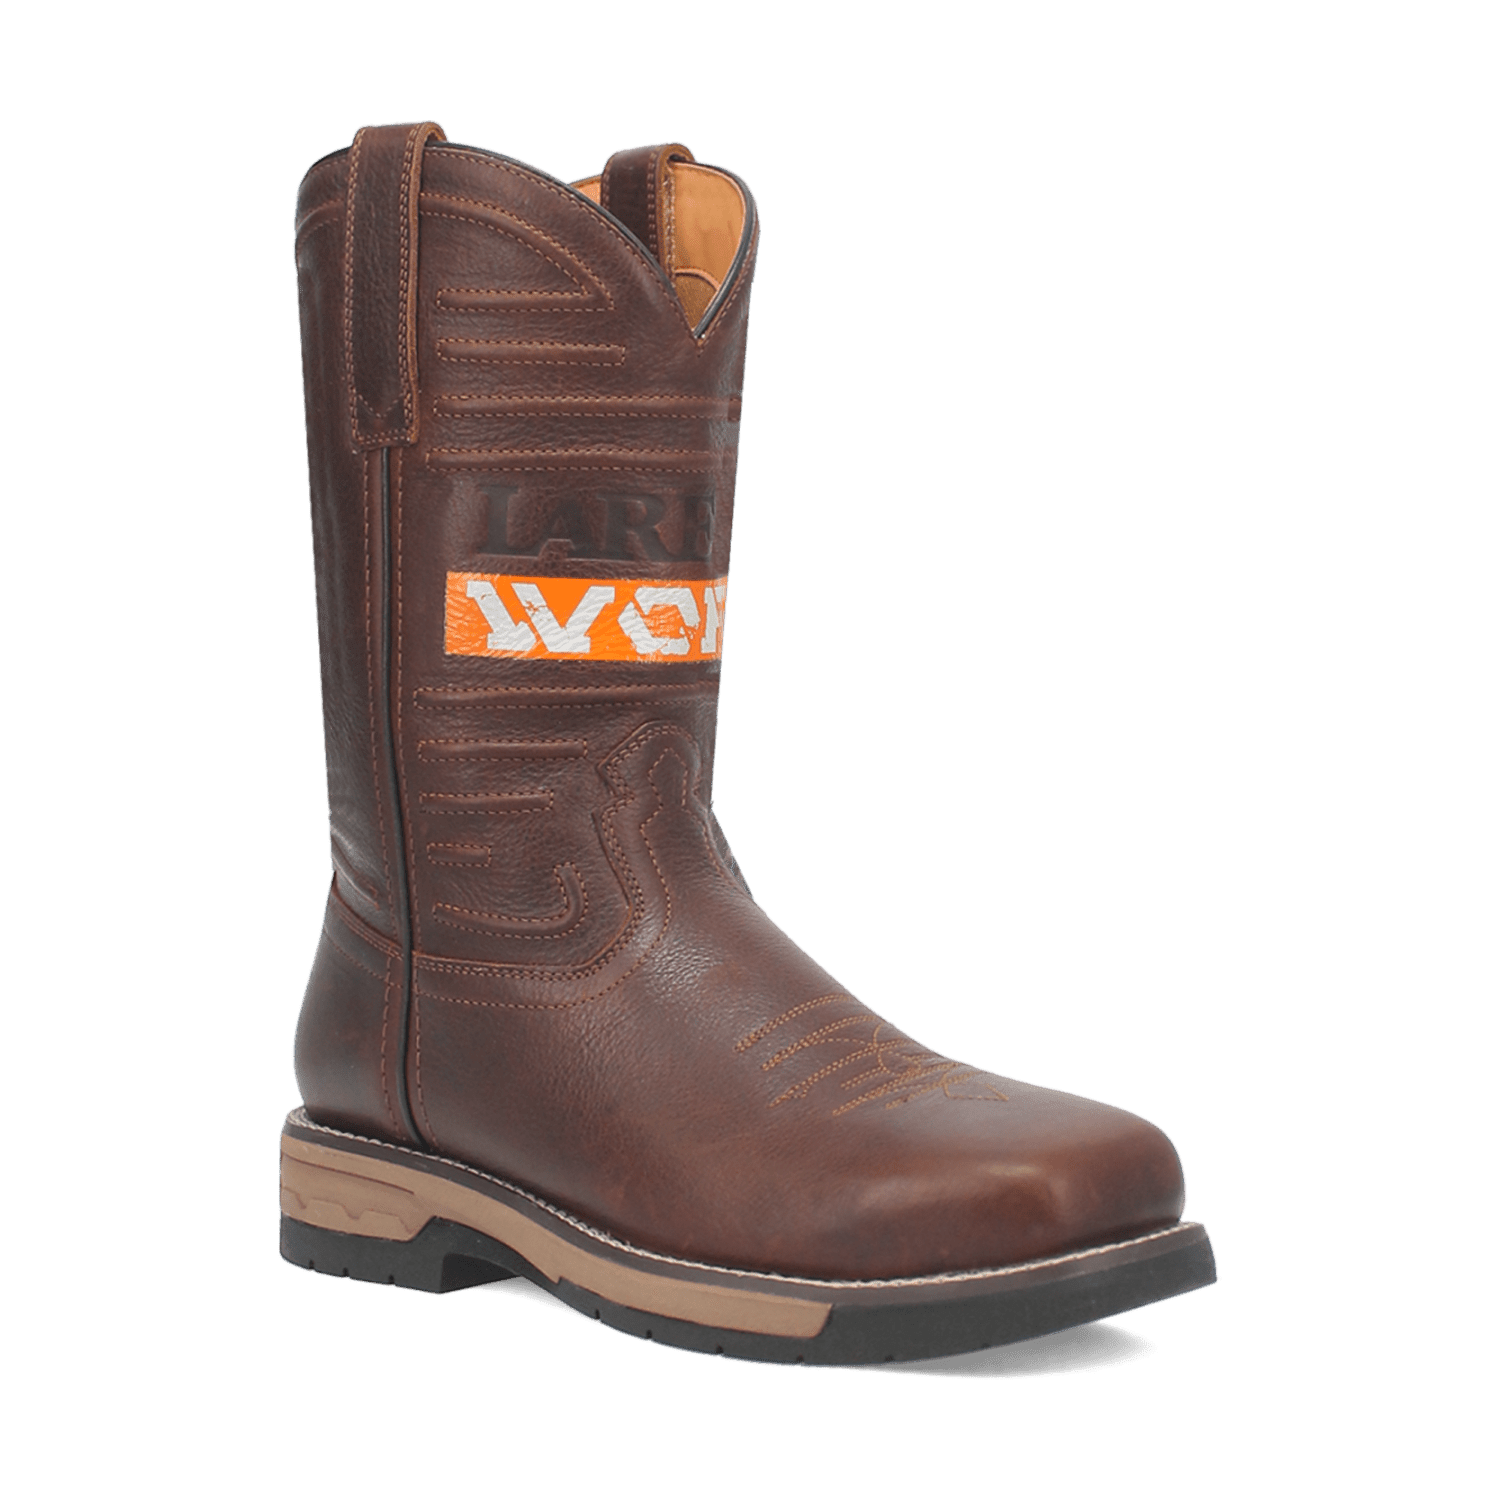 WORKHORSE STEEL TOE LEATHER BOOT Cover